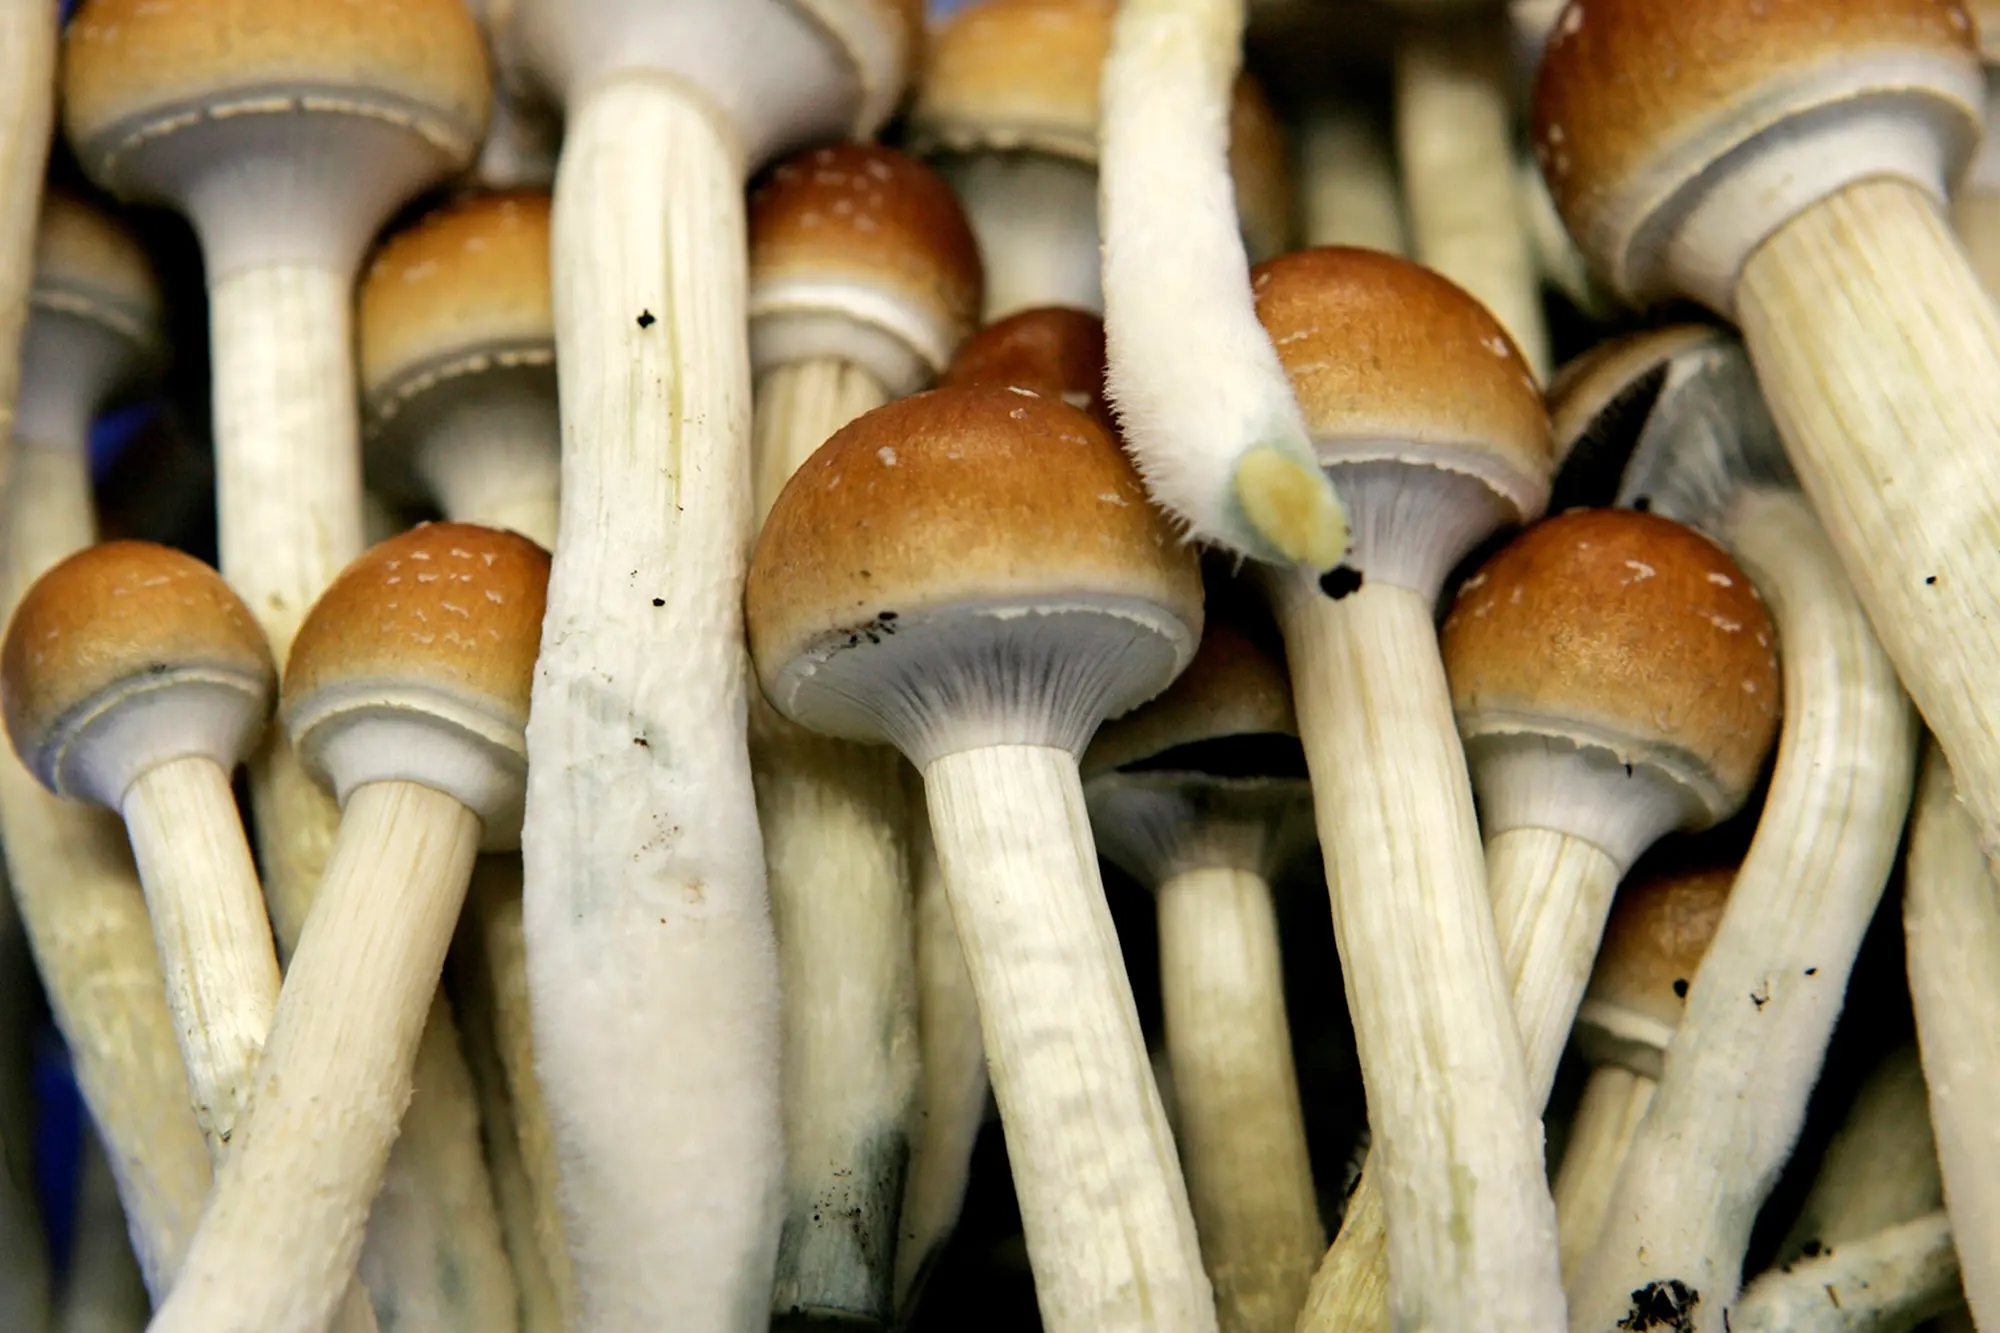 Buy Shrooms DC: Tips for Sourcing High-Quality Psychedelics